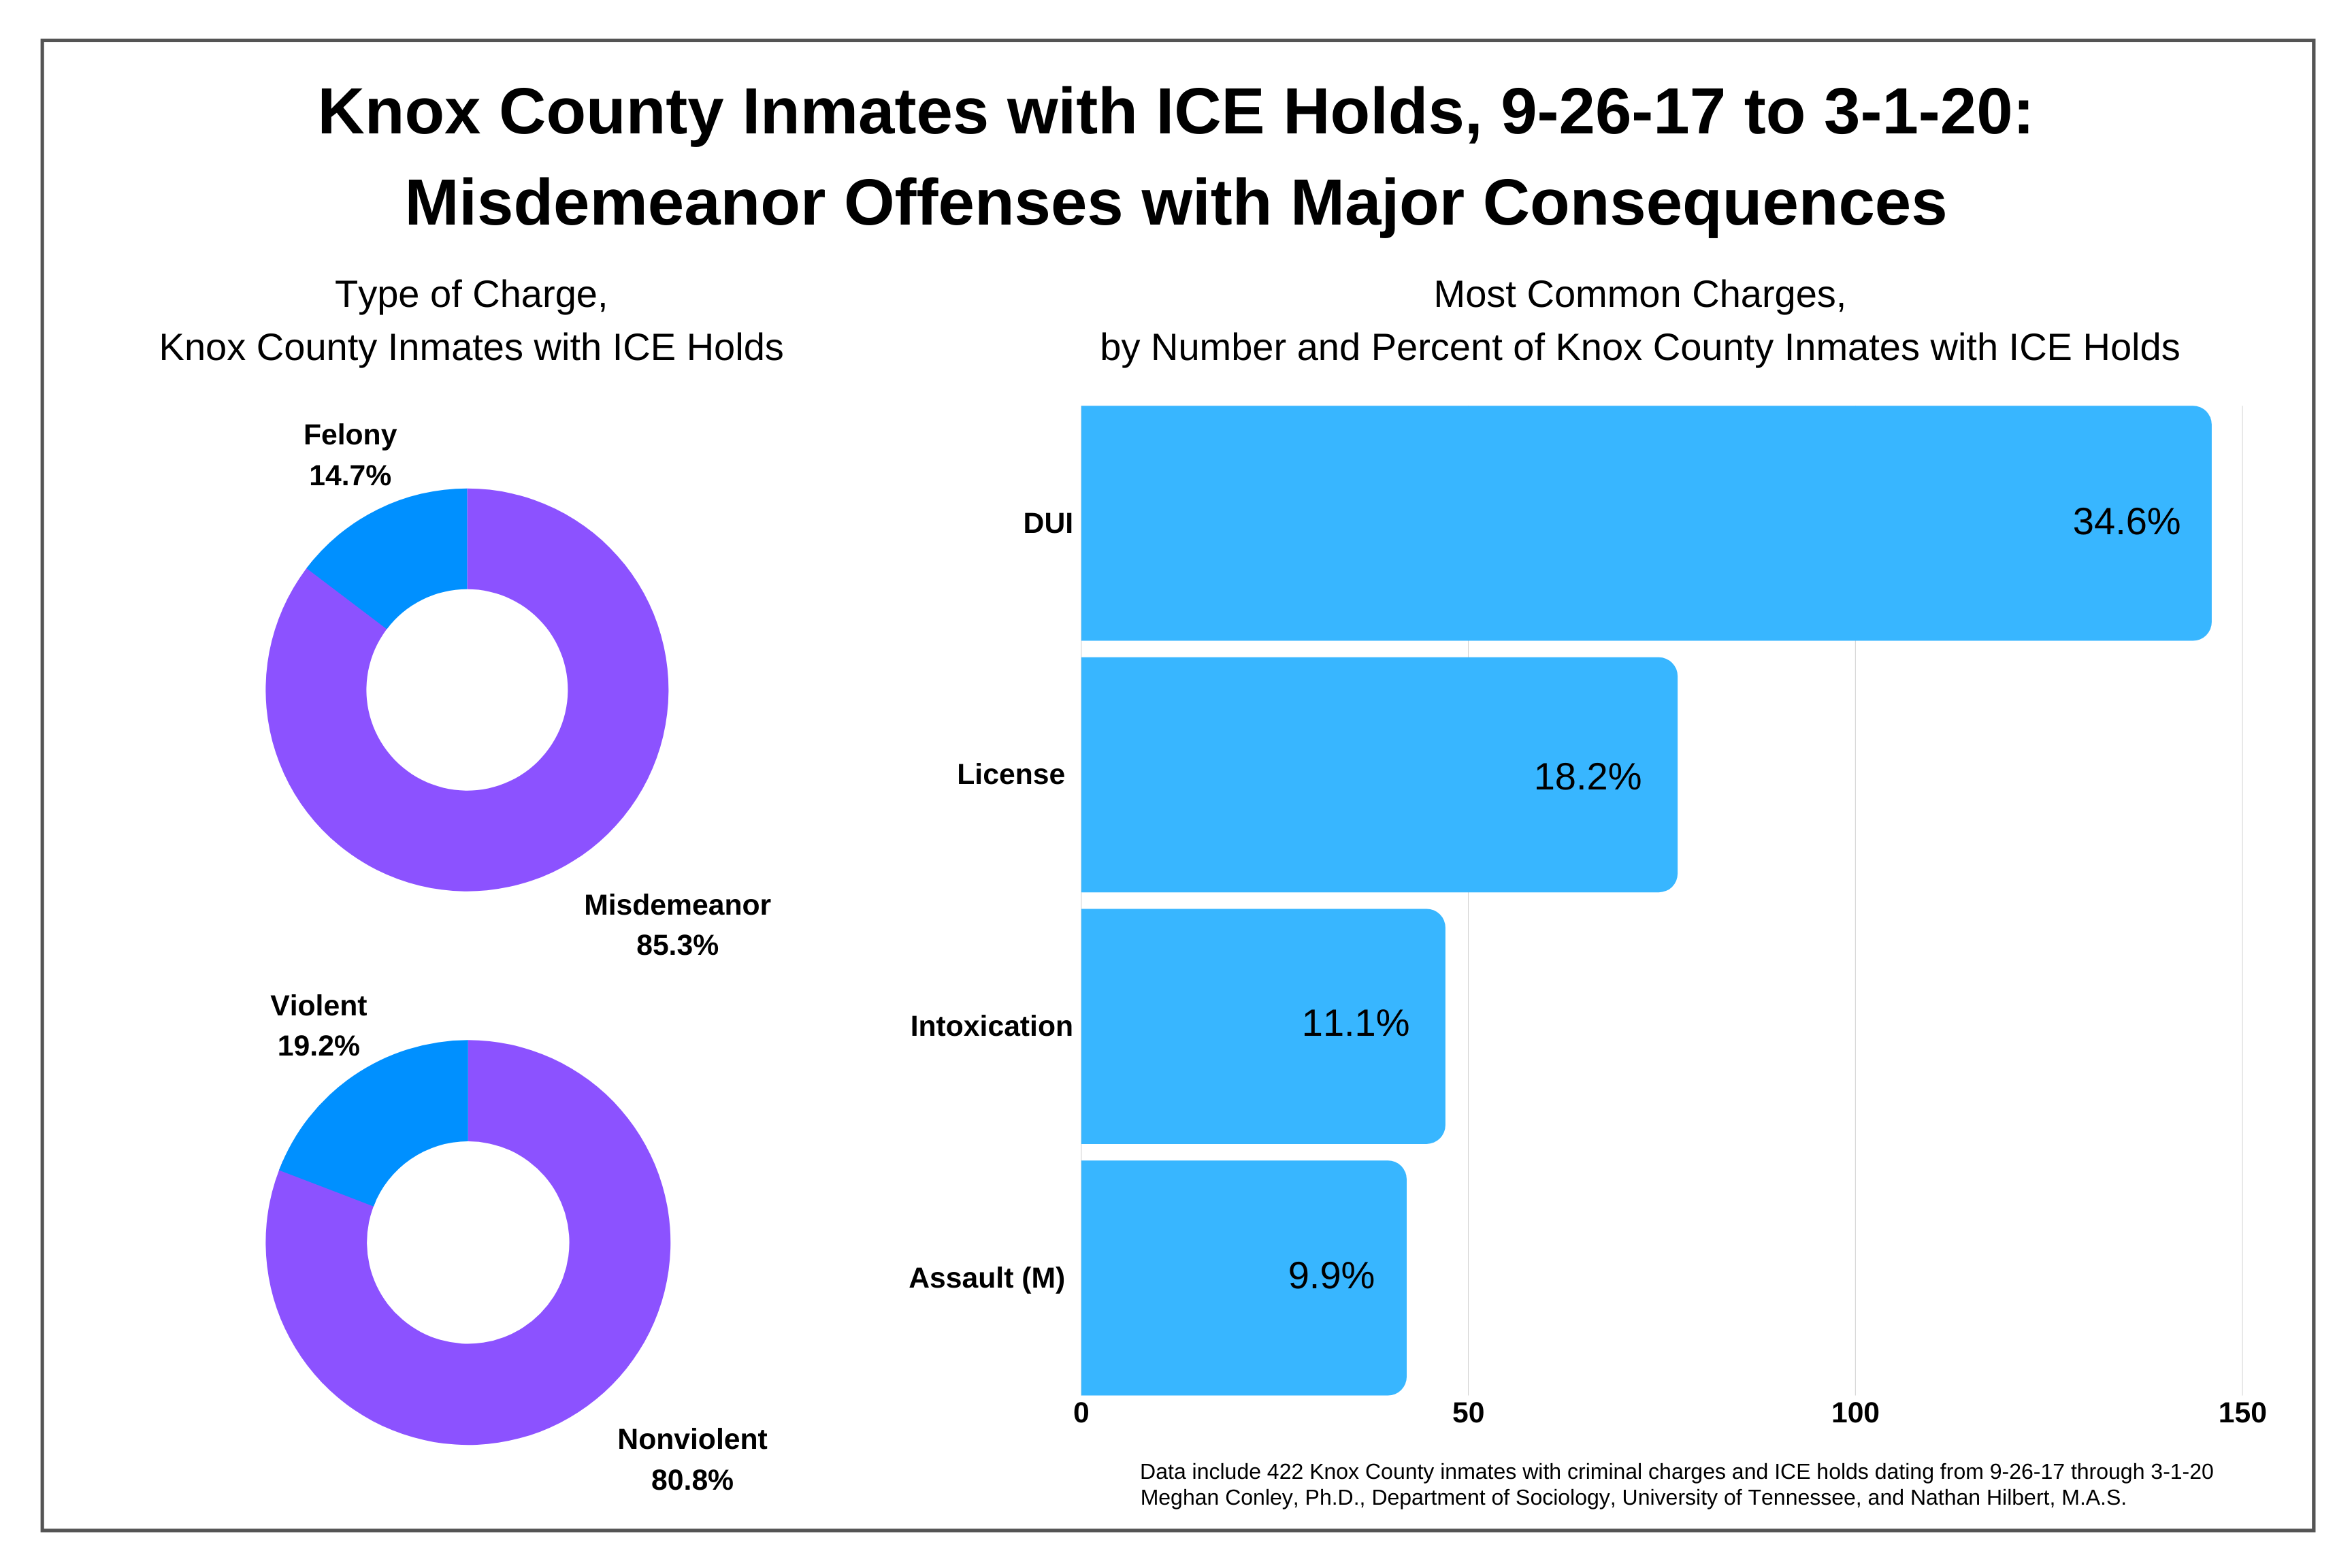 Knox County Inmates with ICE Holds: Misdemeanor Offenses with Major Consequences